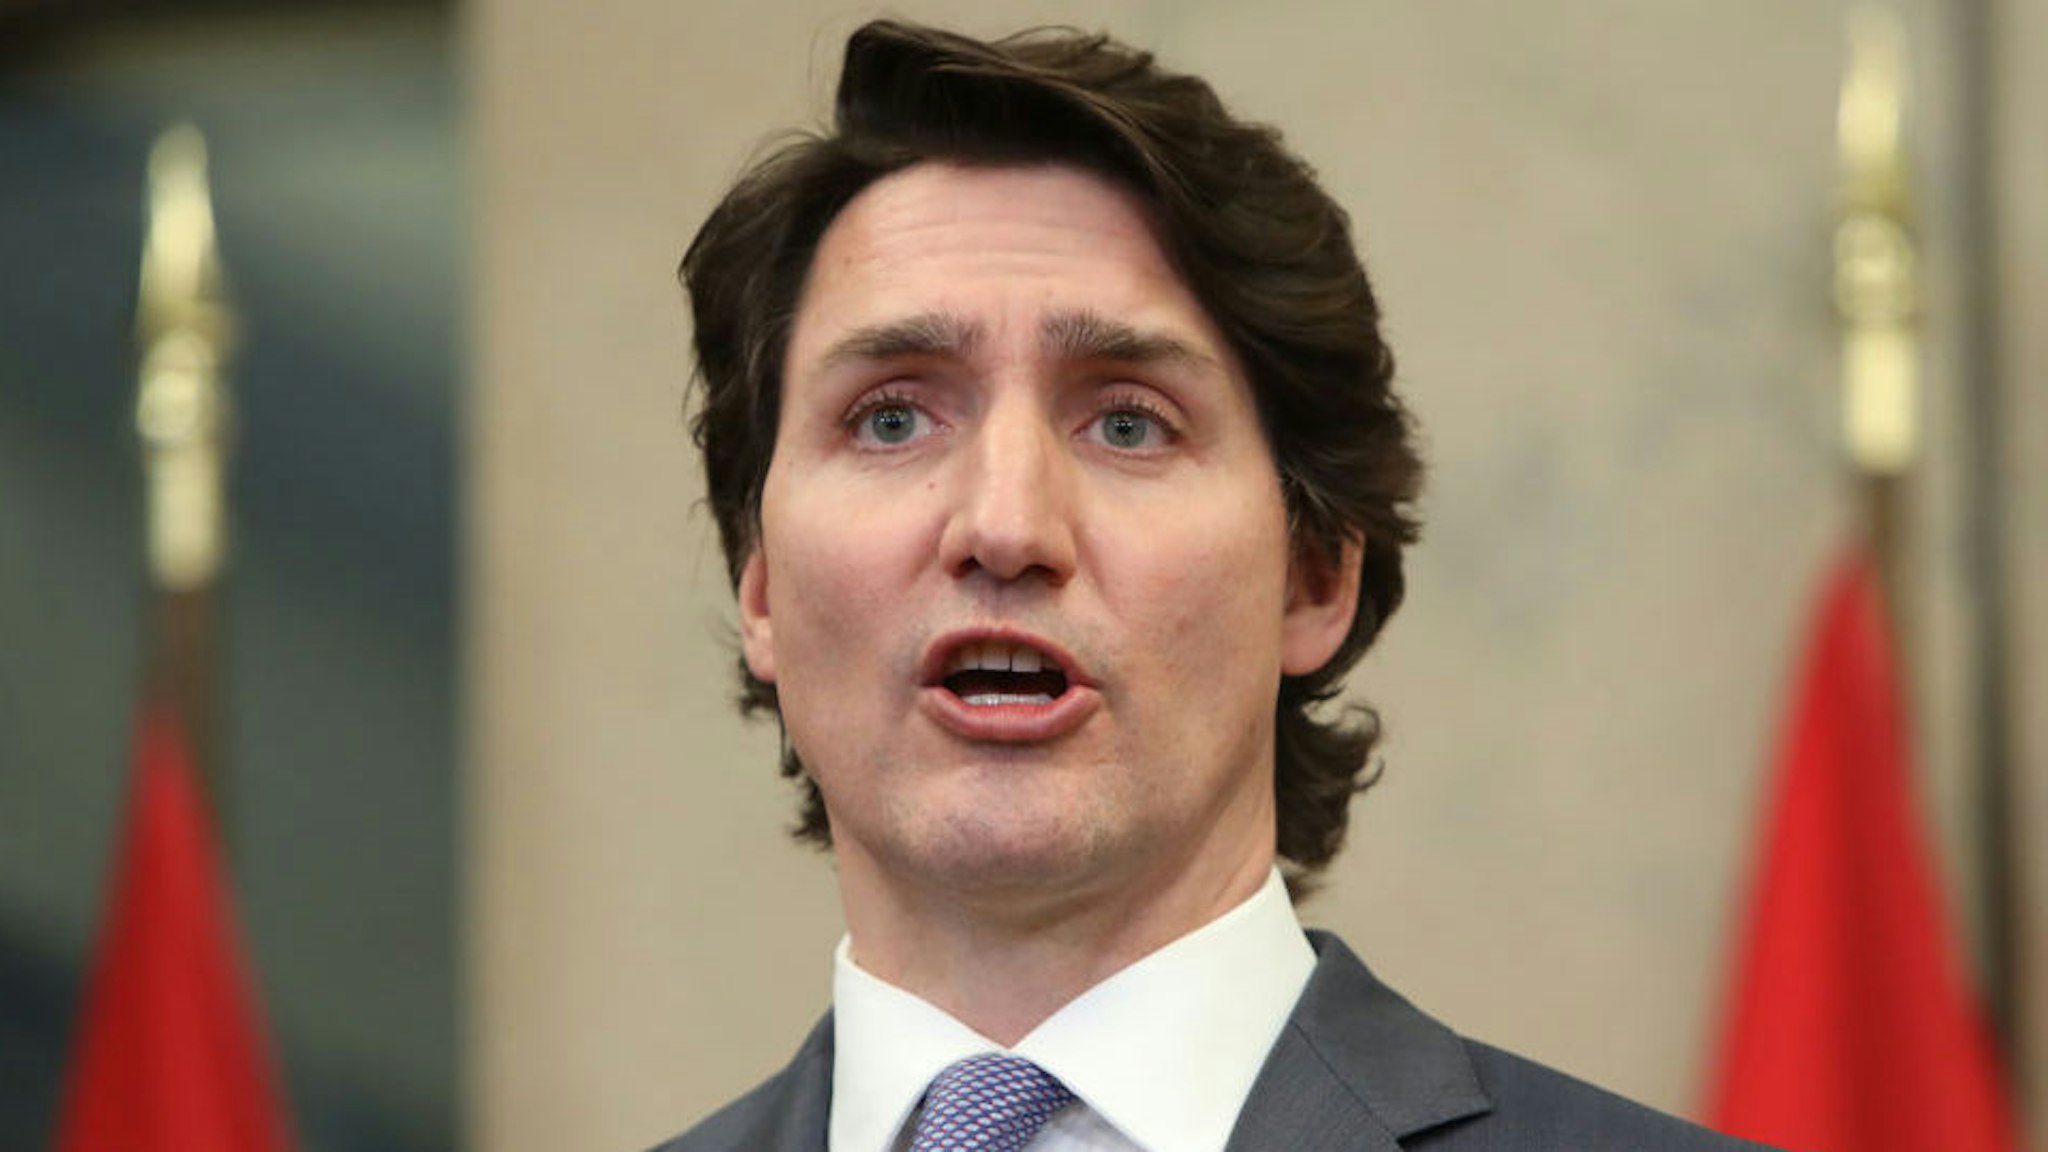 Justin Trudeau, Canada's prime minister, speaks during a news conference in Ottawa, Ontario, Canada, on Wednesday, Jan. 26, 2022.